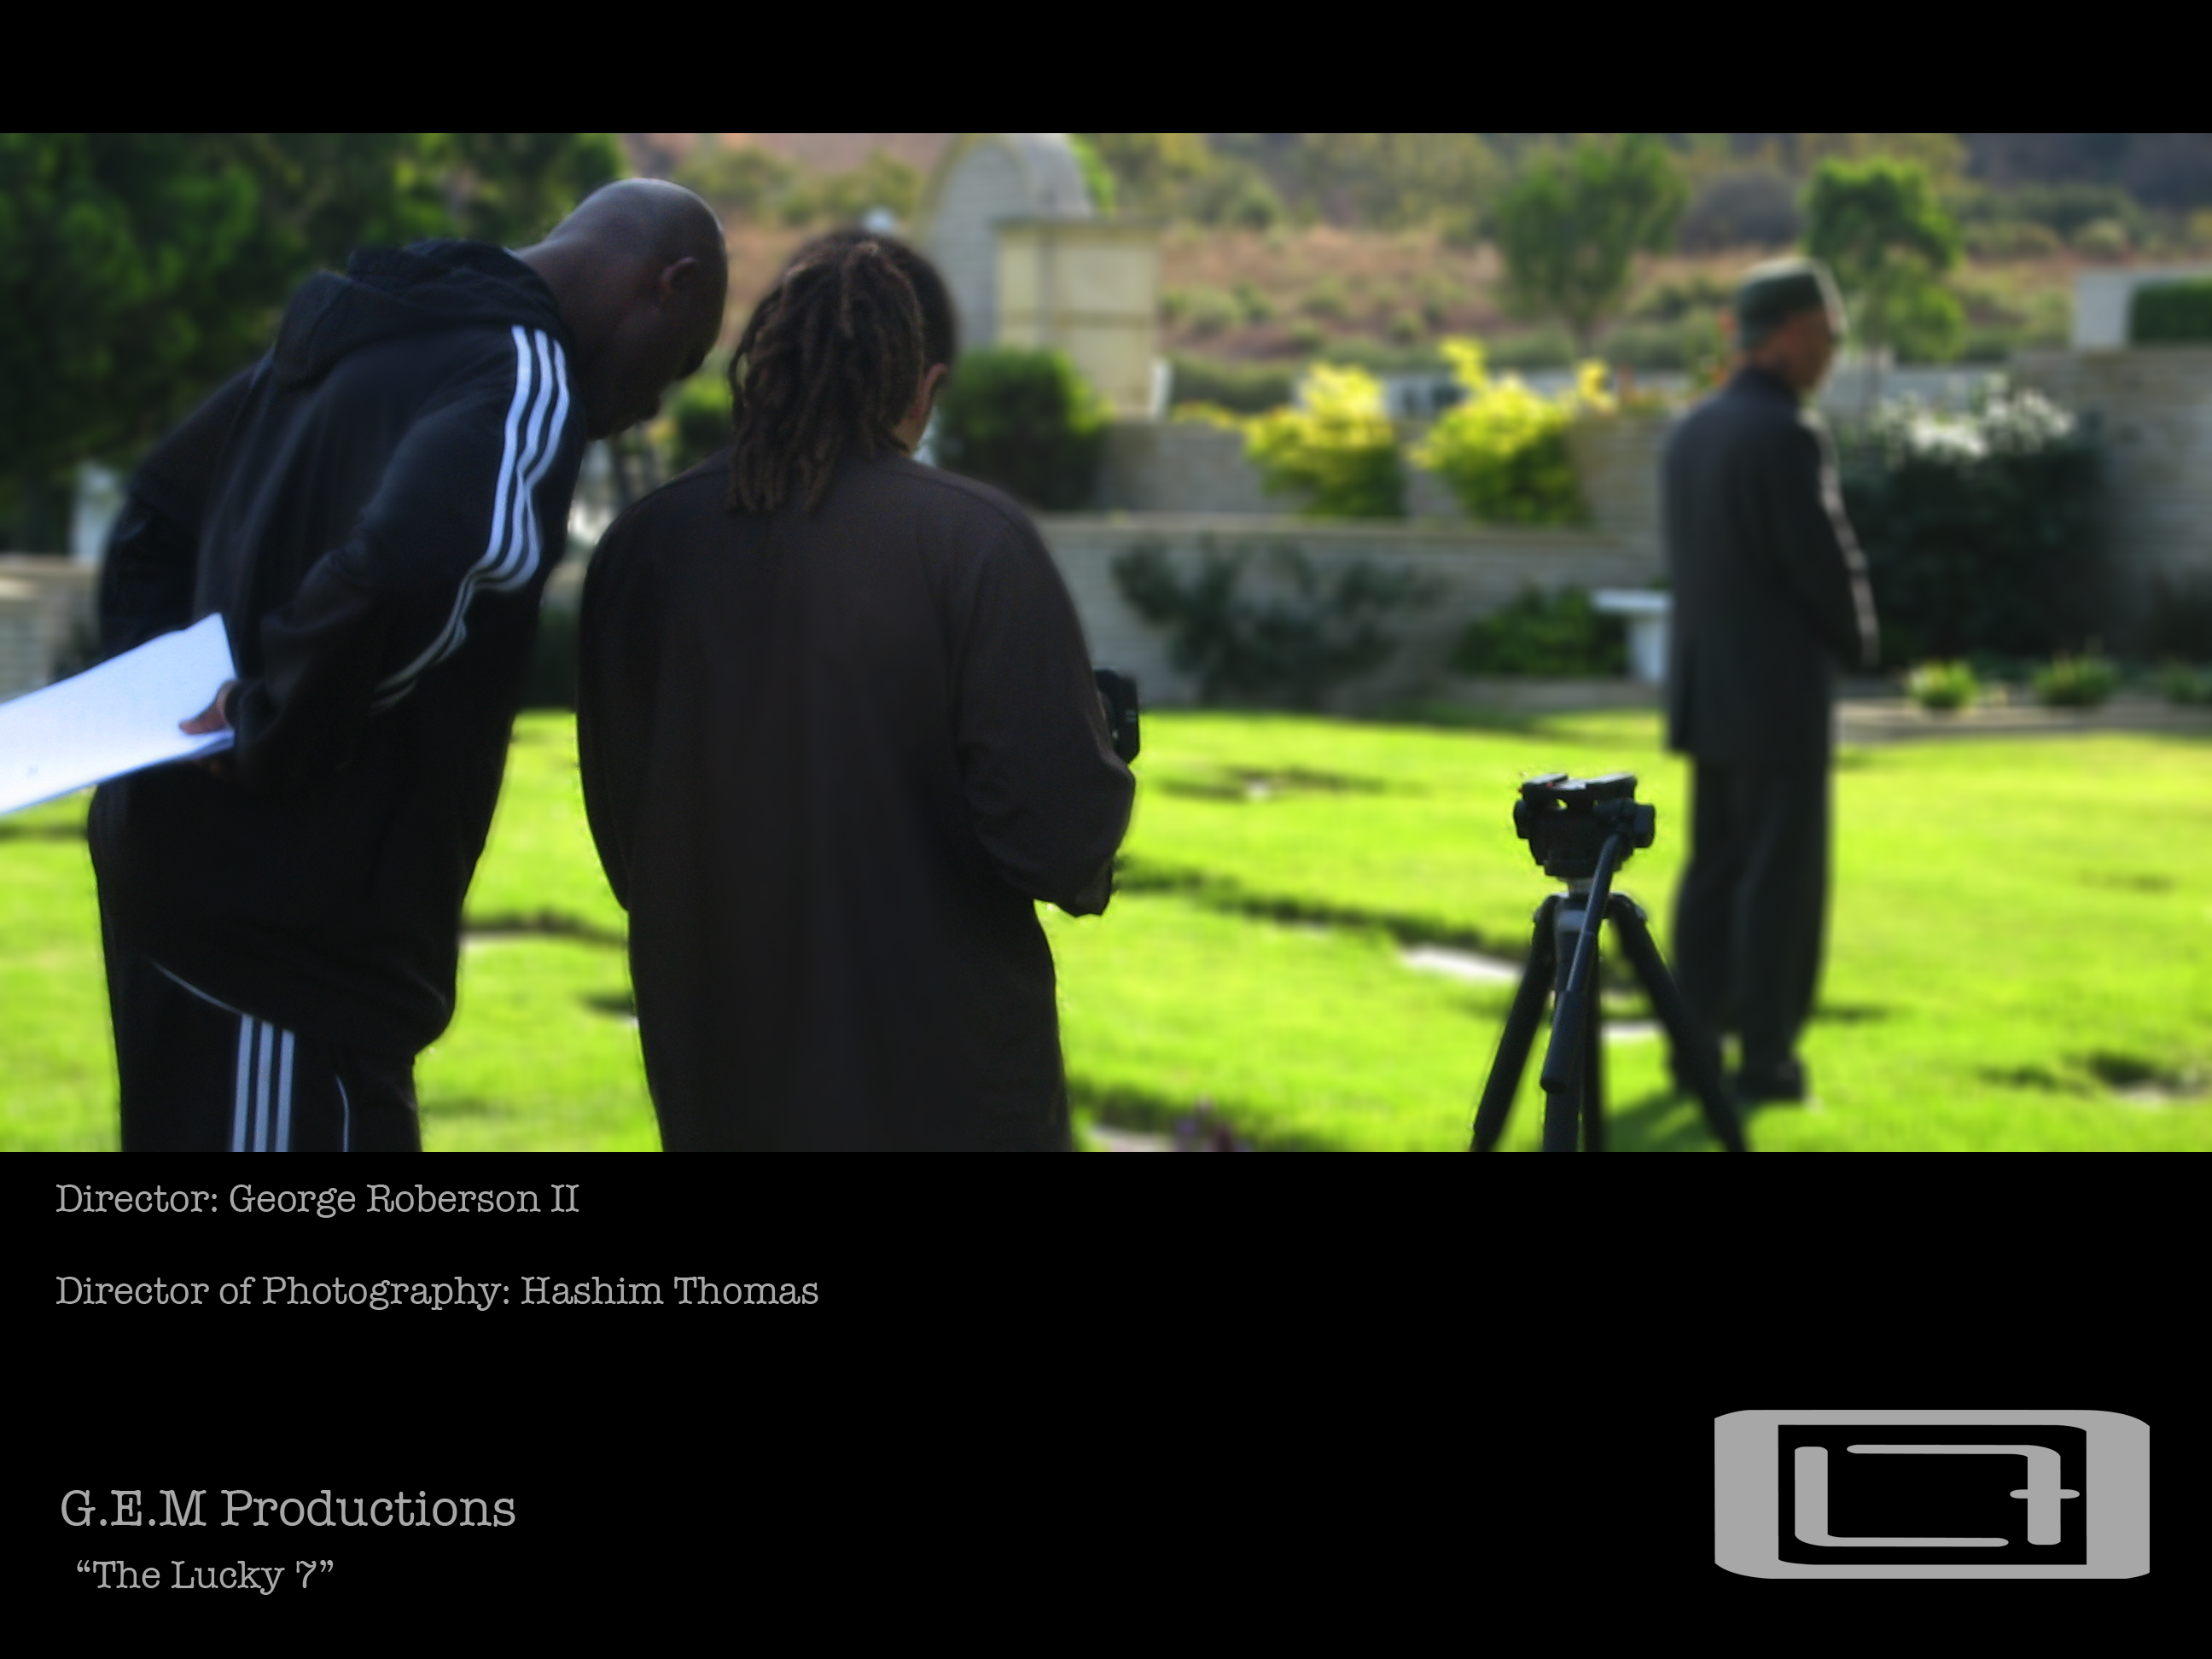 Director George Roberson II and Director of Photography Hashim Thomas